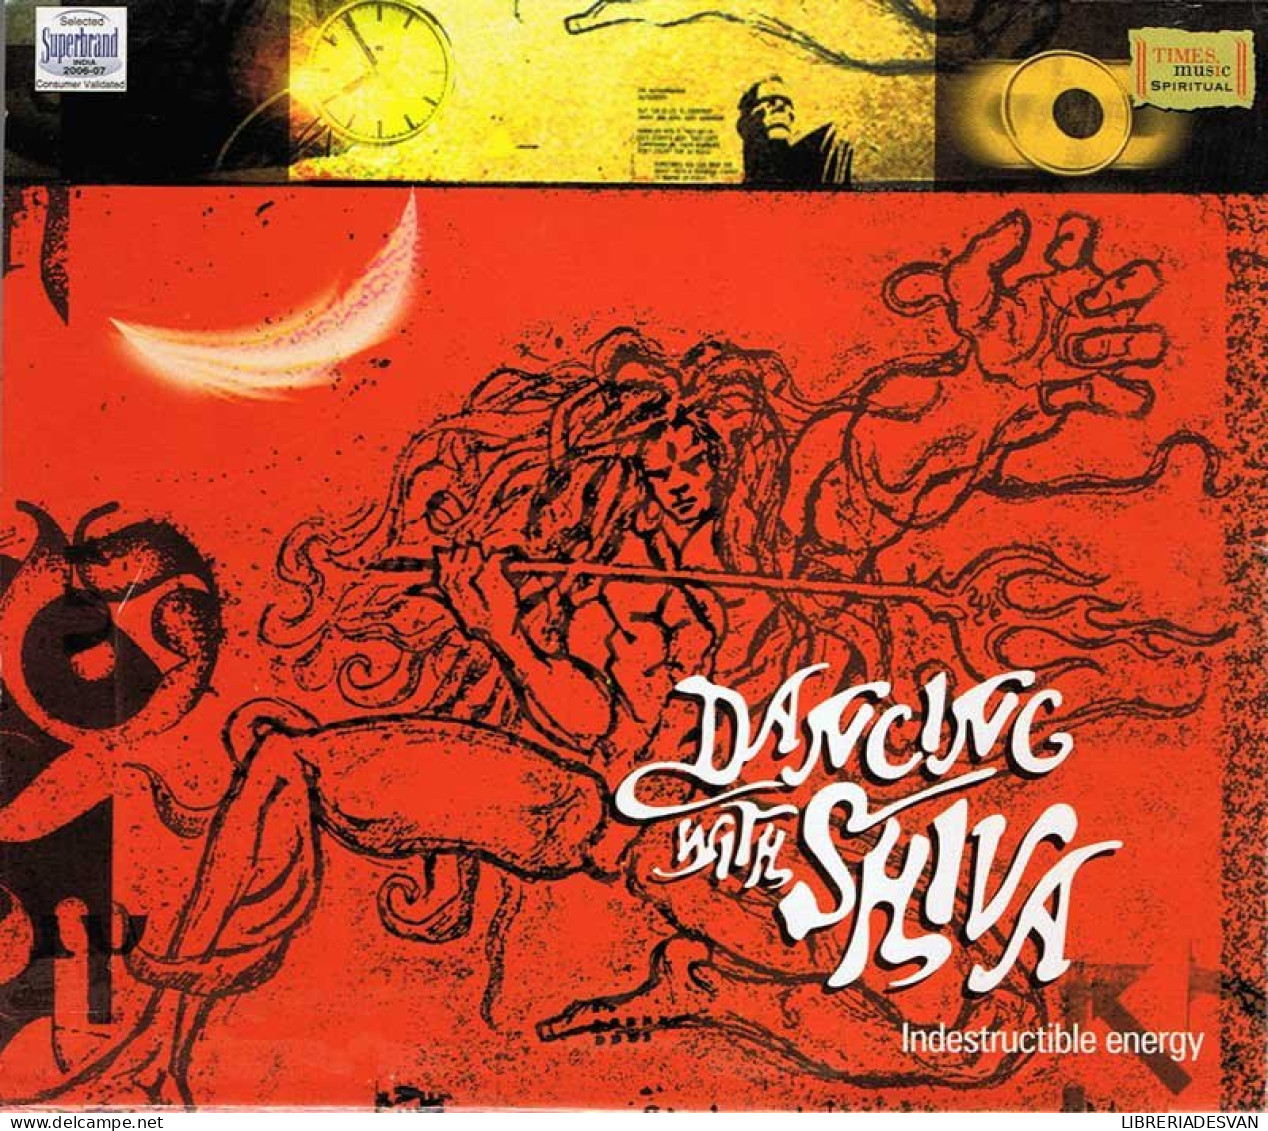 Dancing With Shiva. Indestructible Energy. CD - New Age